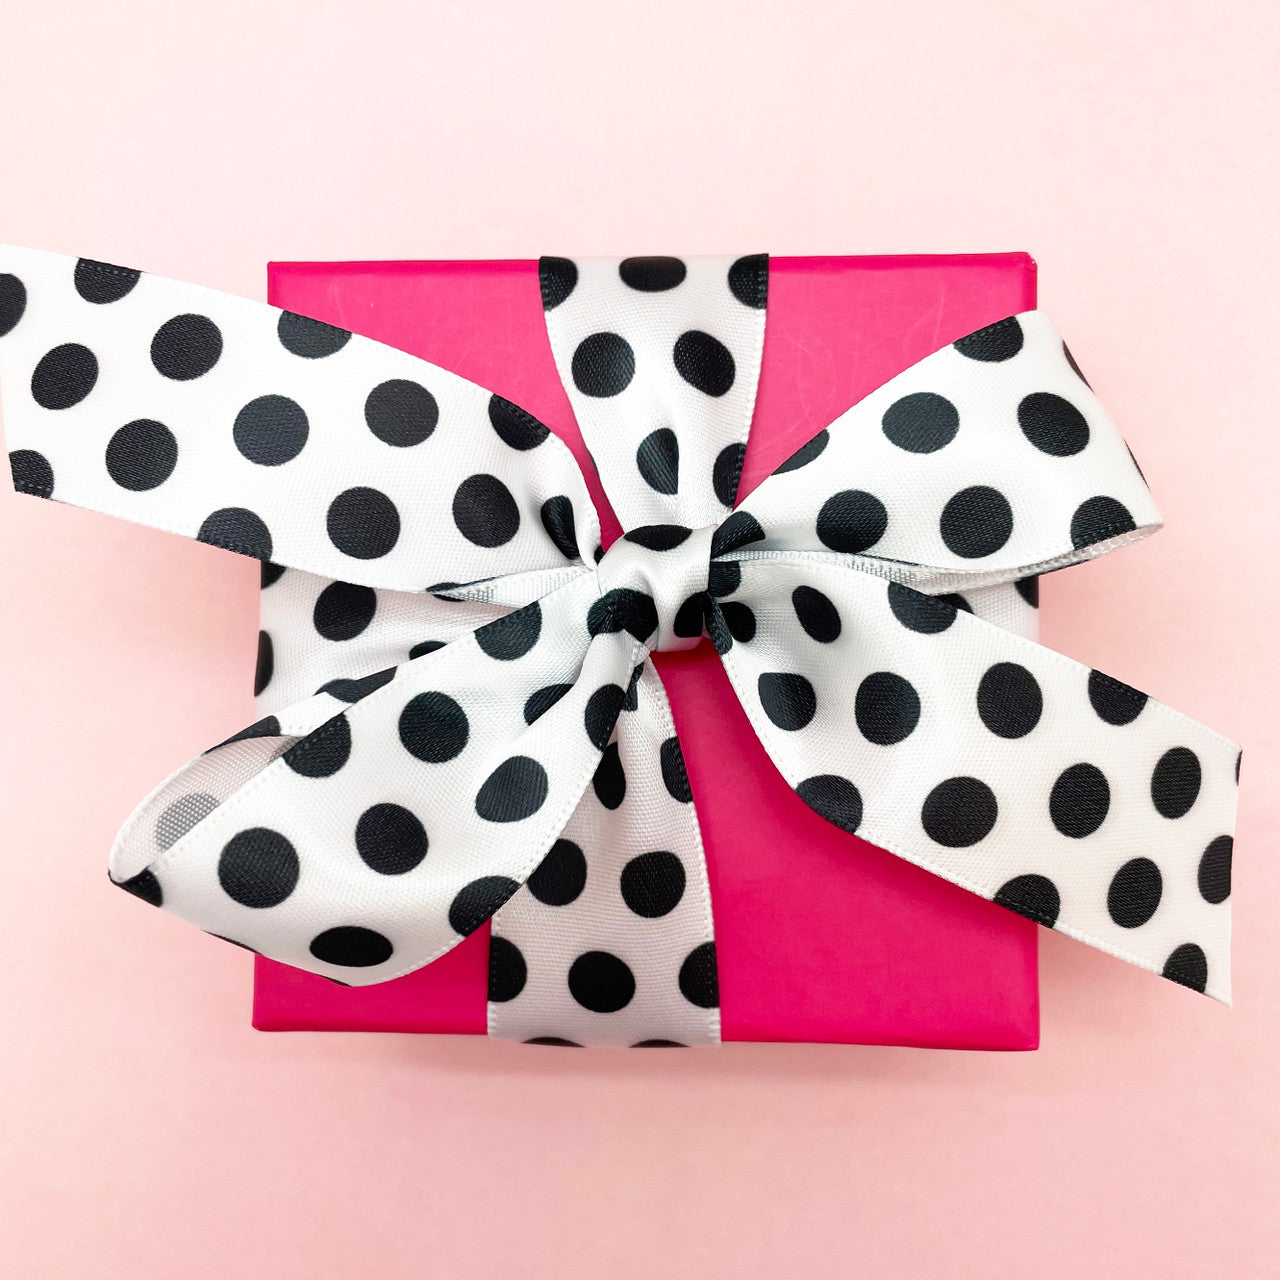 There's nothing prettier than black and white and pink! This little pink box looks oh so sweet tied with our black and white ribbon!